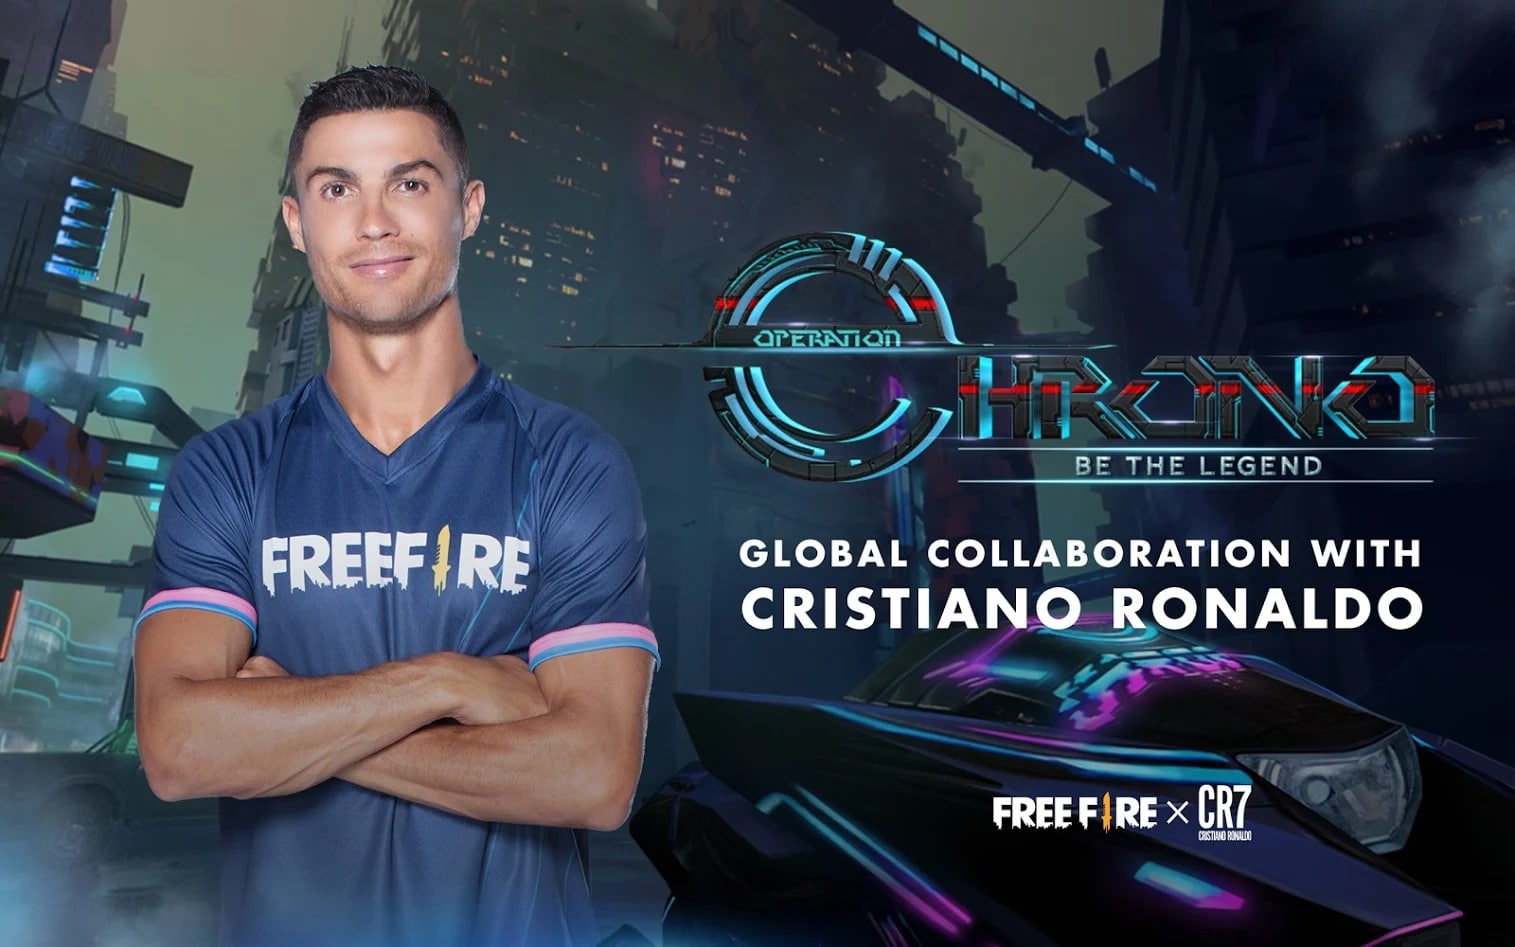 How To Play Cr7 Character Chrono In Free Fire